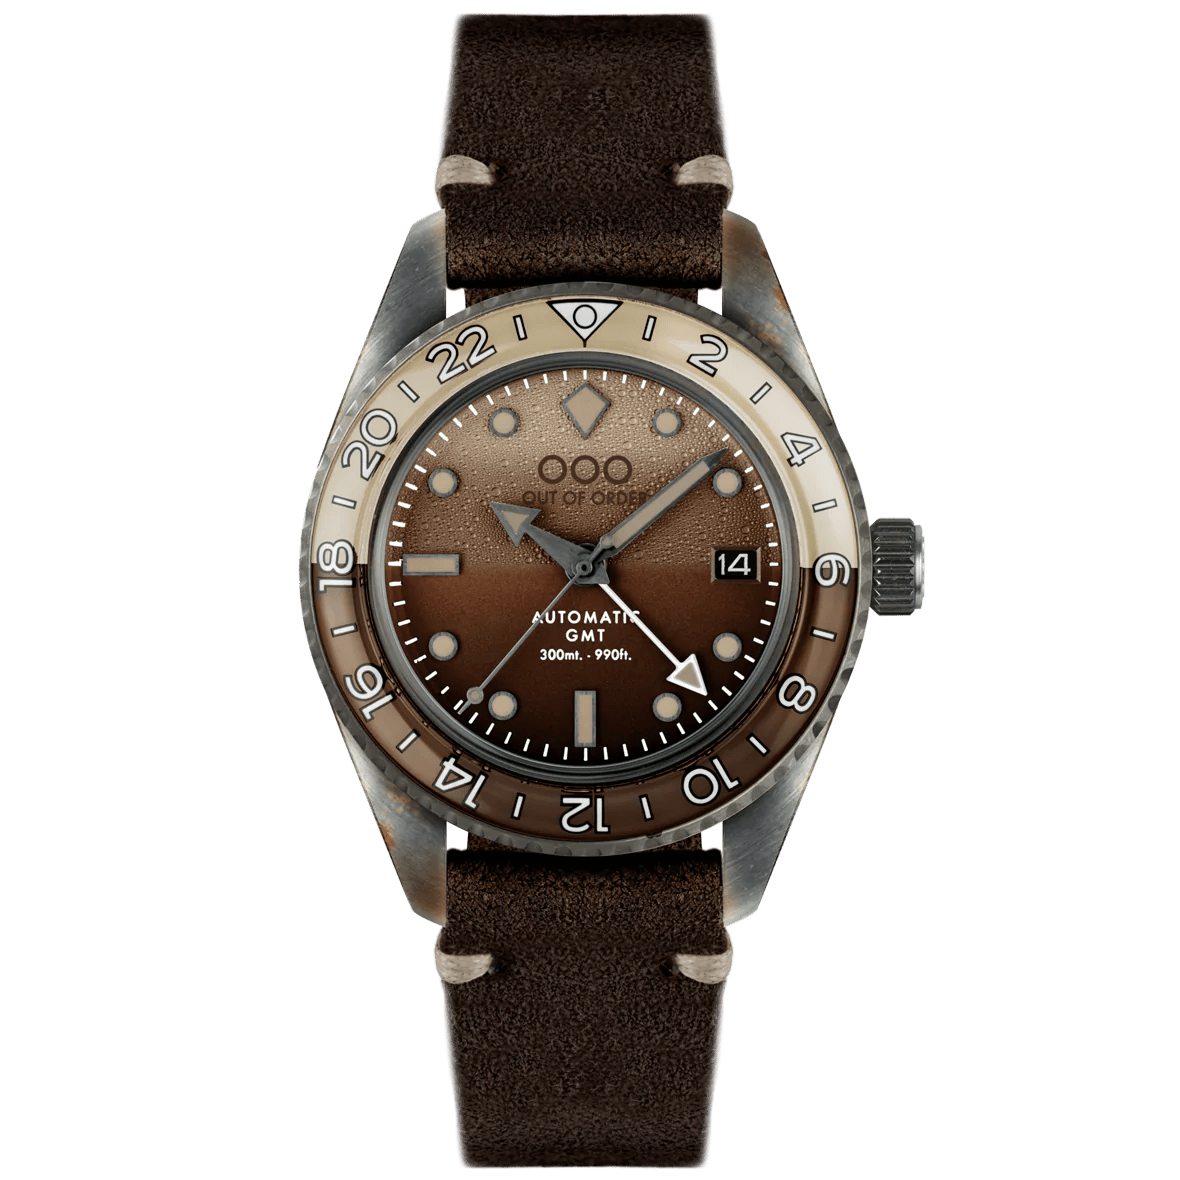 Irish Coffee Automatic GMT OUT OF ORDER - MONSIEUR